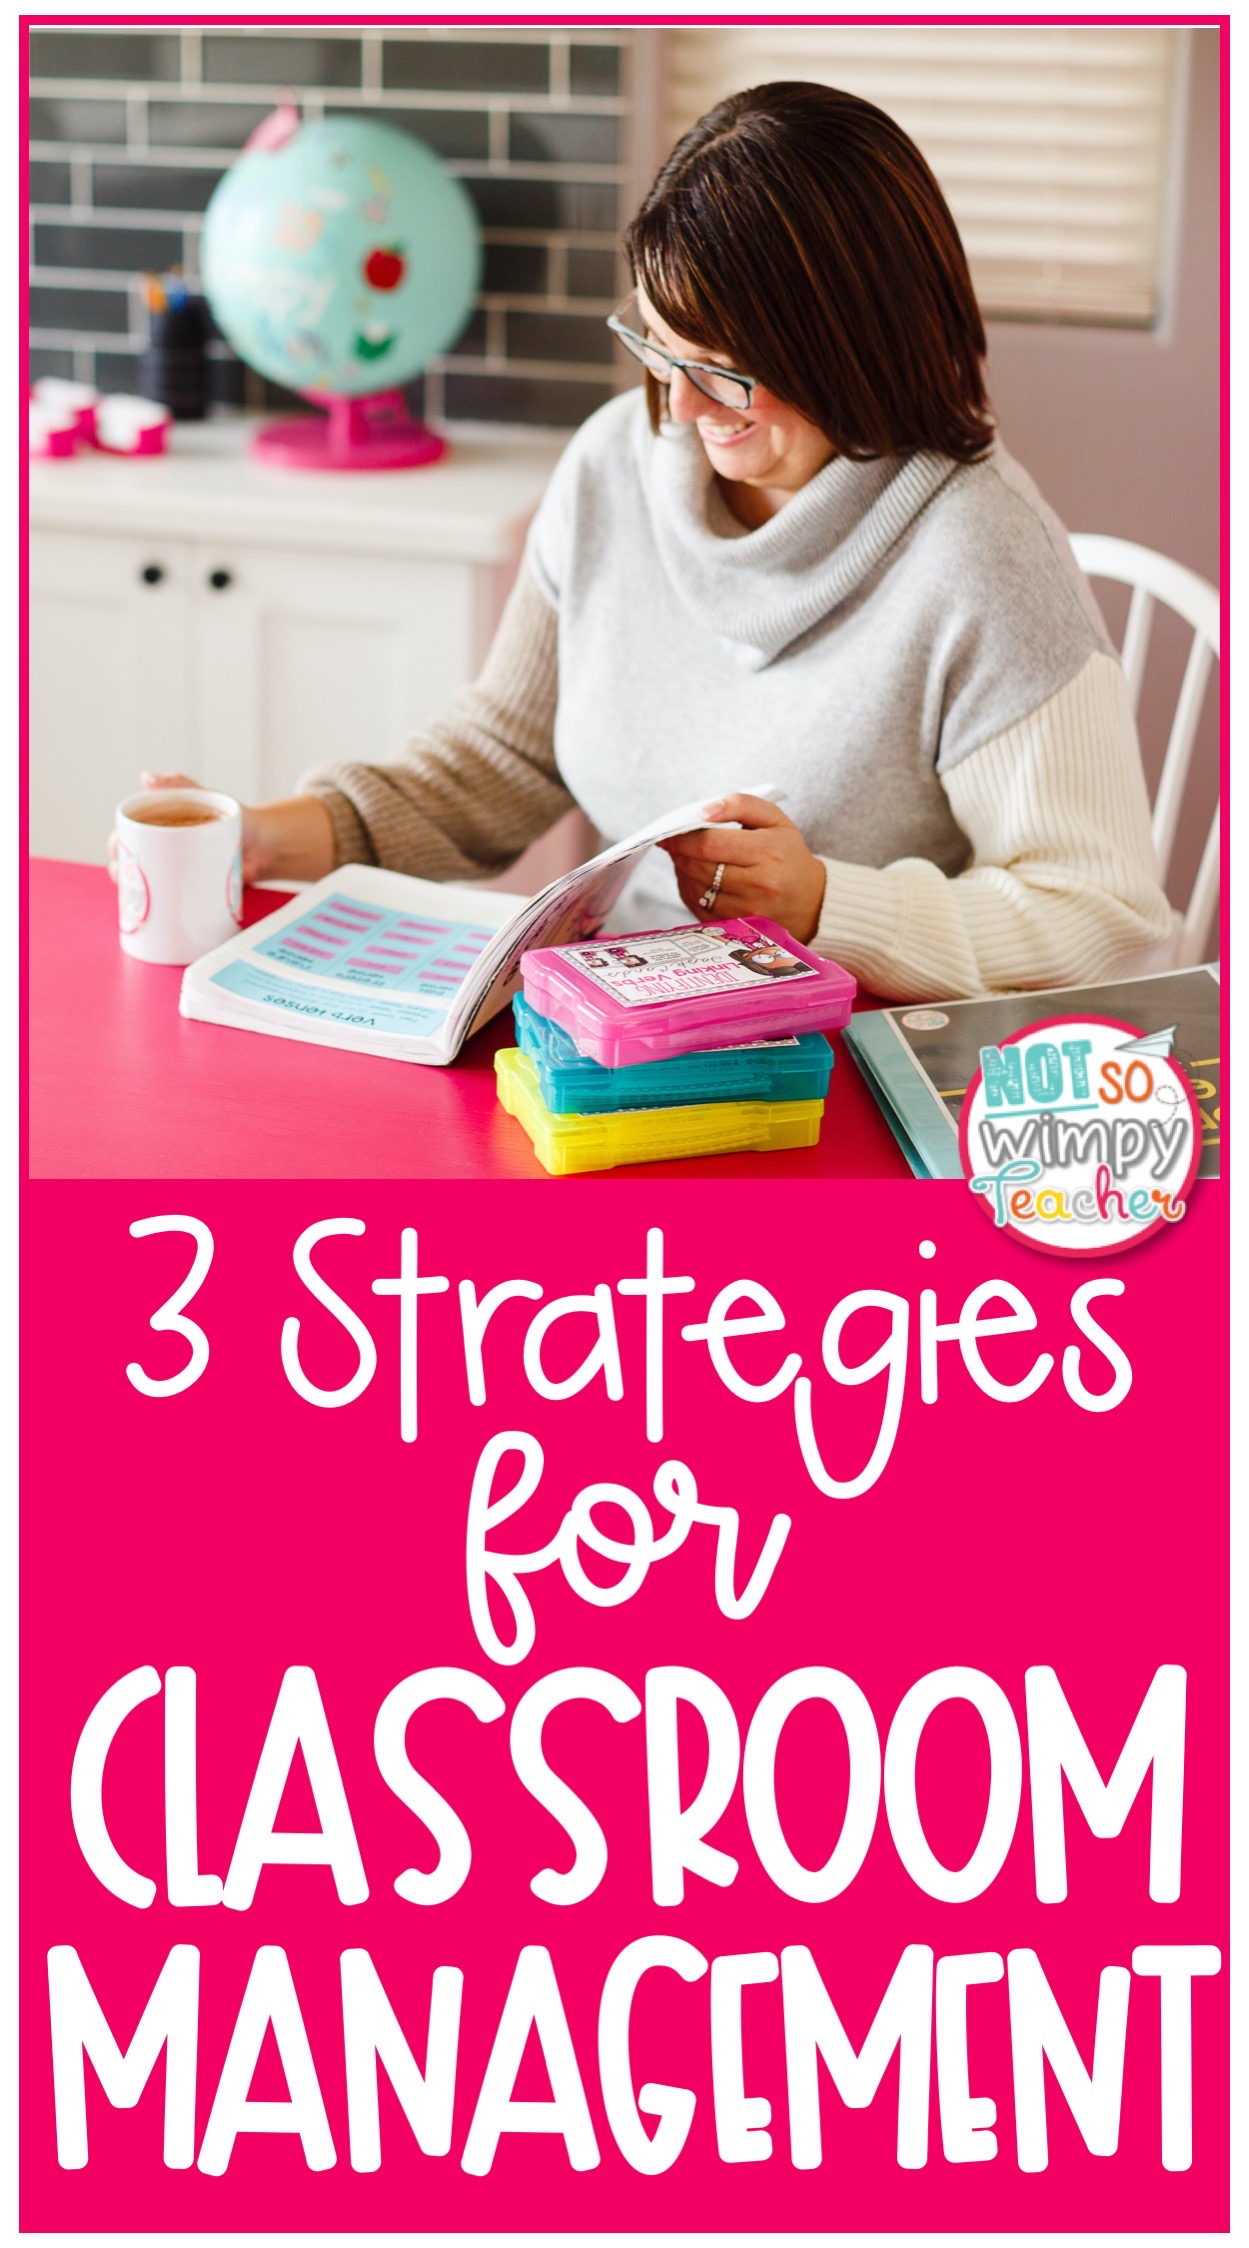 smiling teacher with text overlay 3 Strategies for Classroom Management